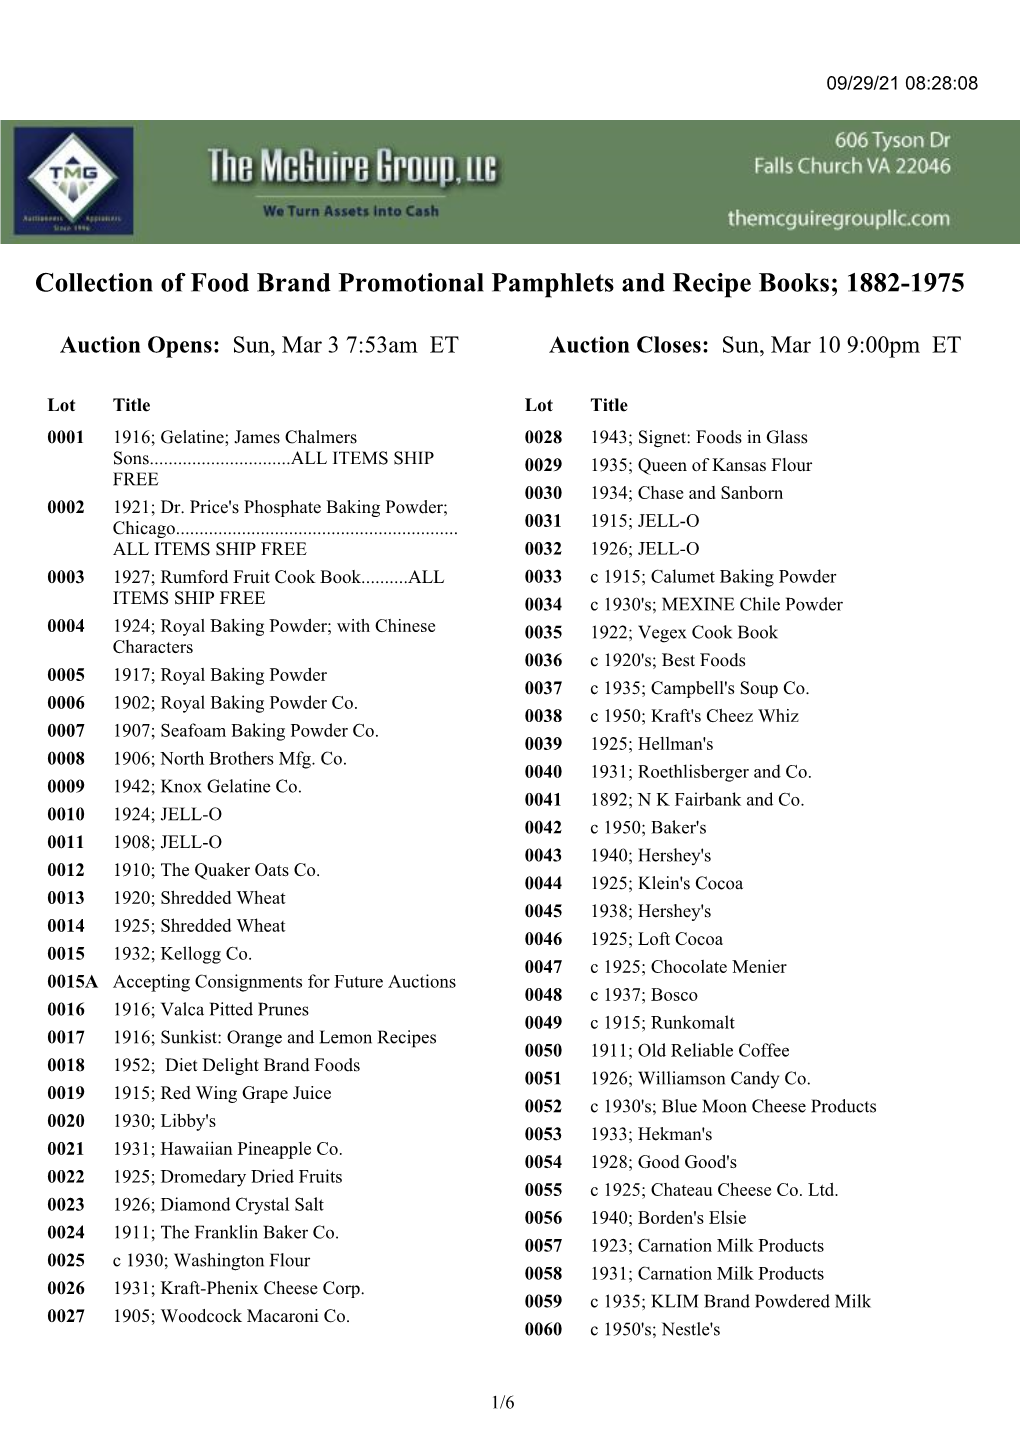 Collection of Food Brand Promotional Pamphlets and Recipe Books; 1882-1975